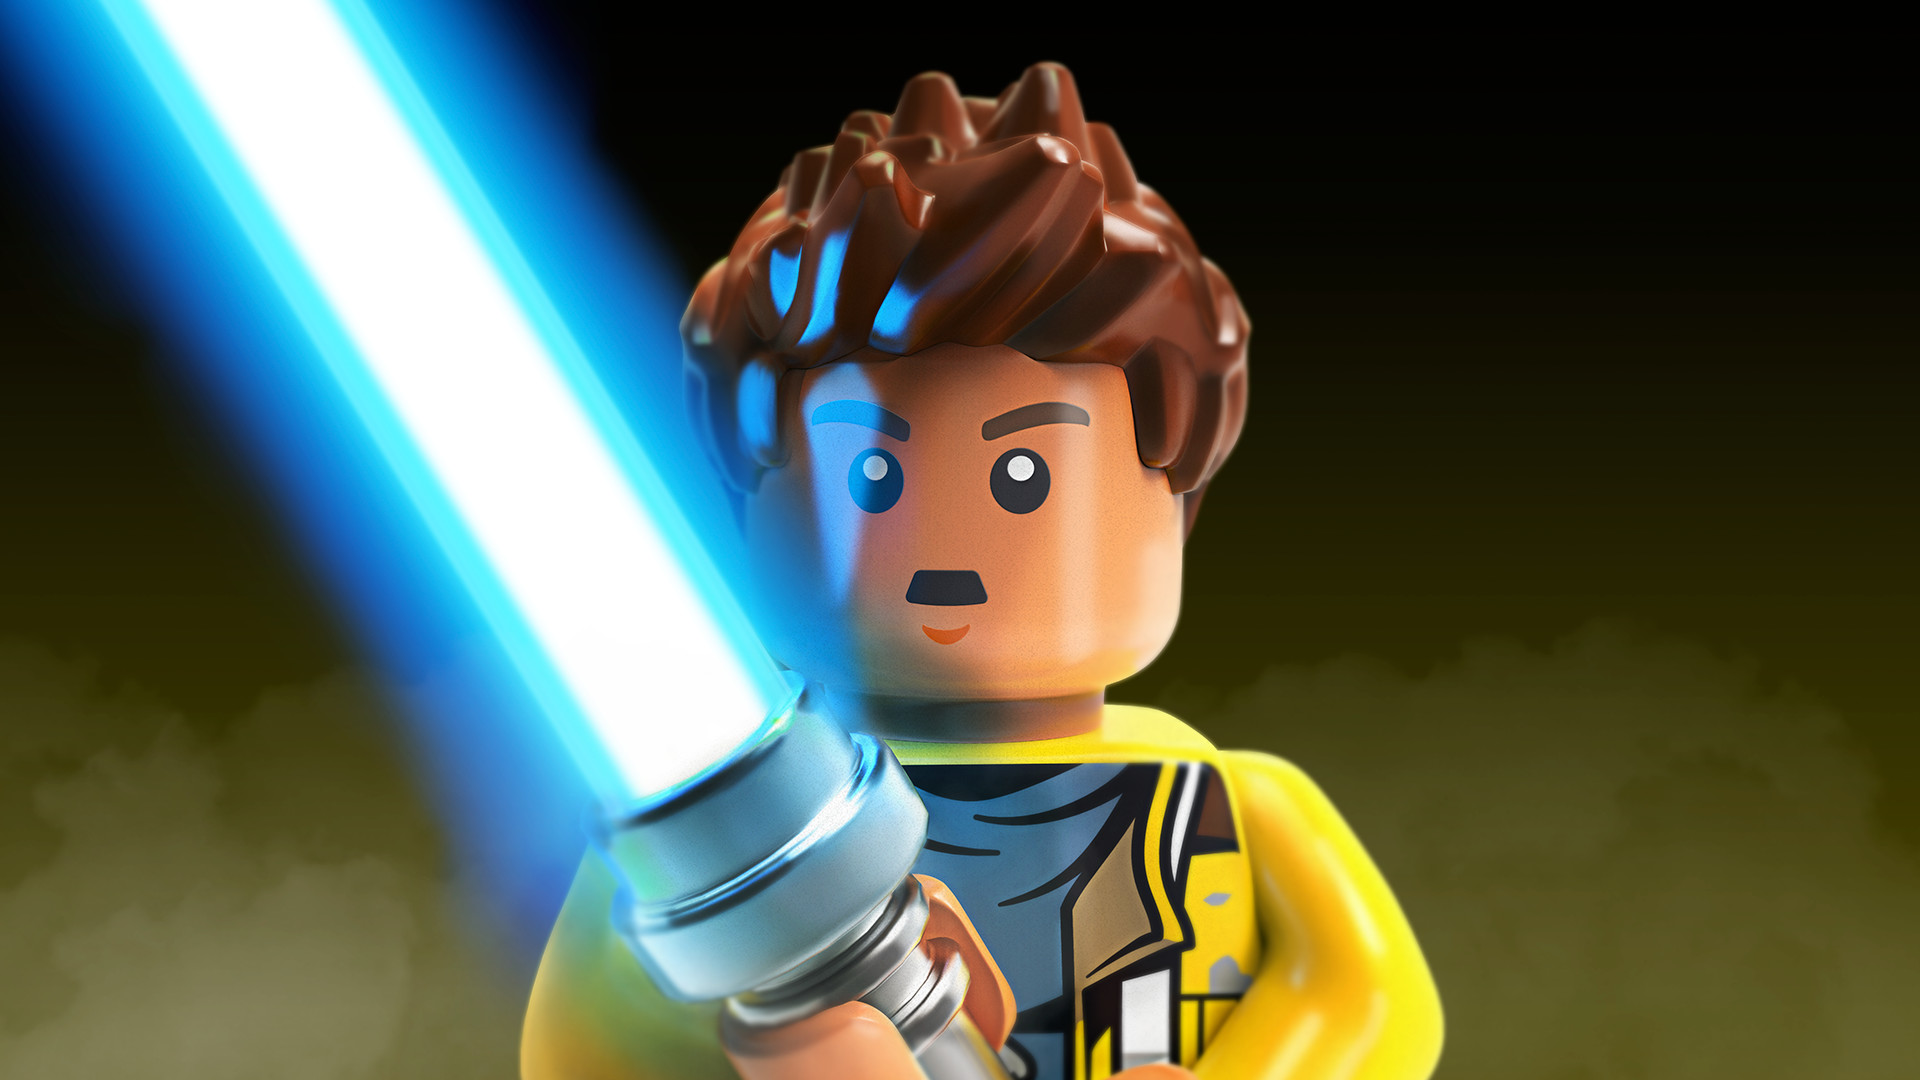 LEGO Star Wars: The Force Awakens - The Freemaker Adventures Character Pack DLC Steam CD Key, $1.68